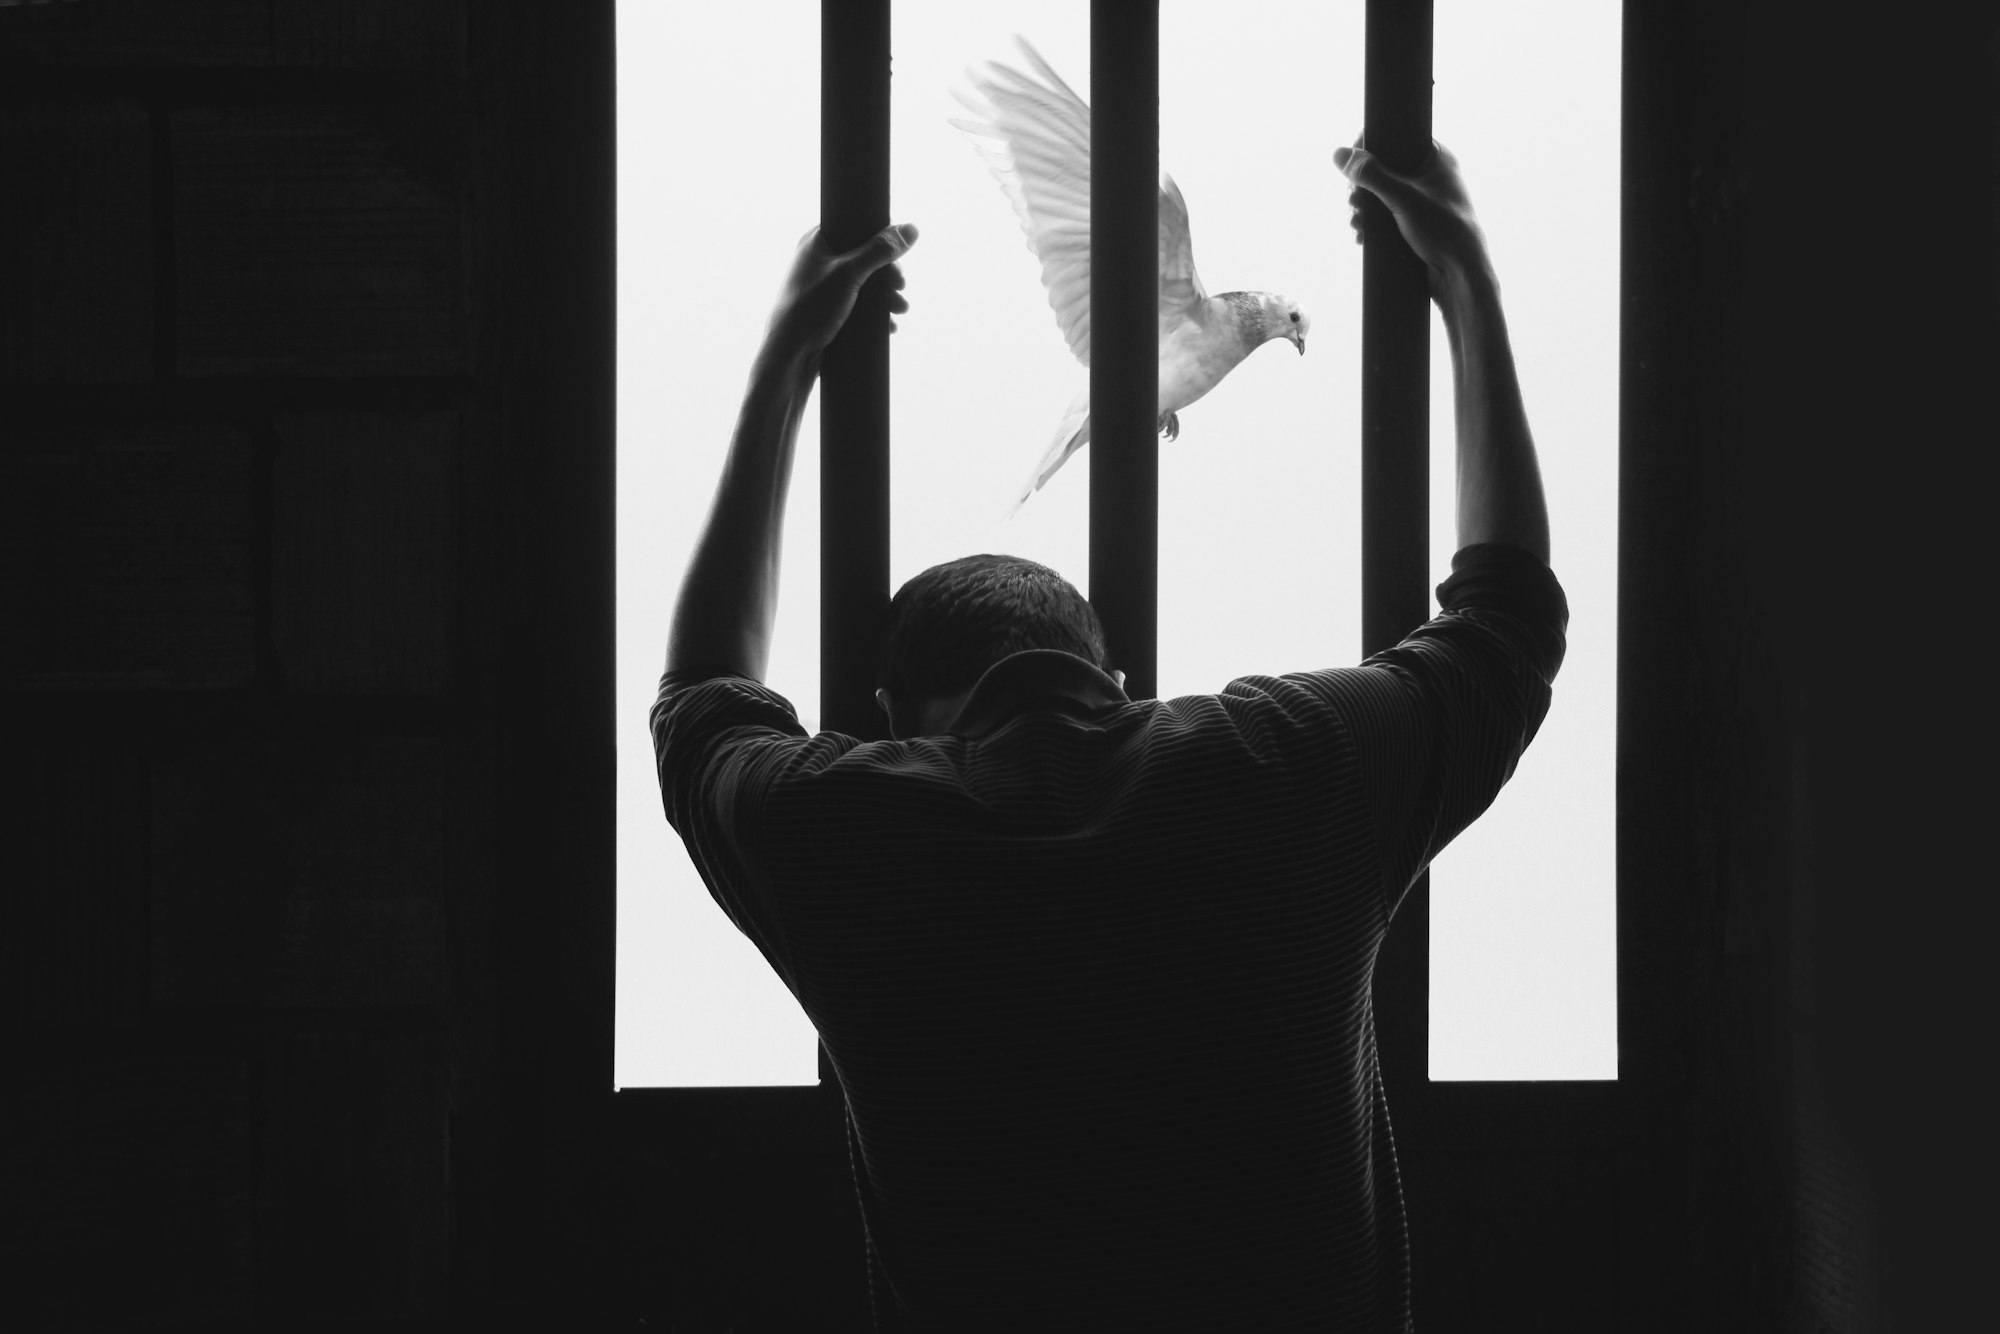 A Man in Prison and Bird Flying Freely